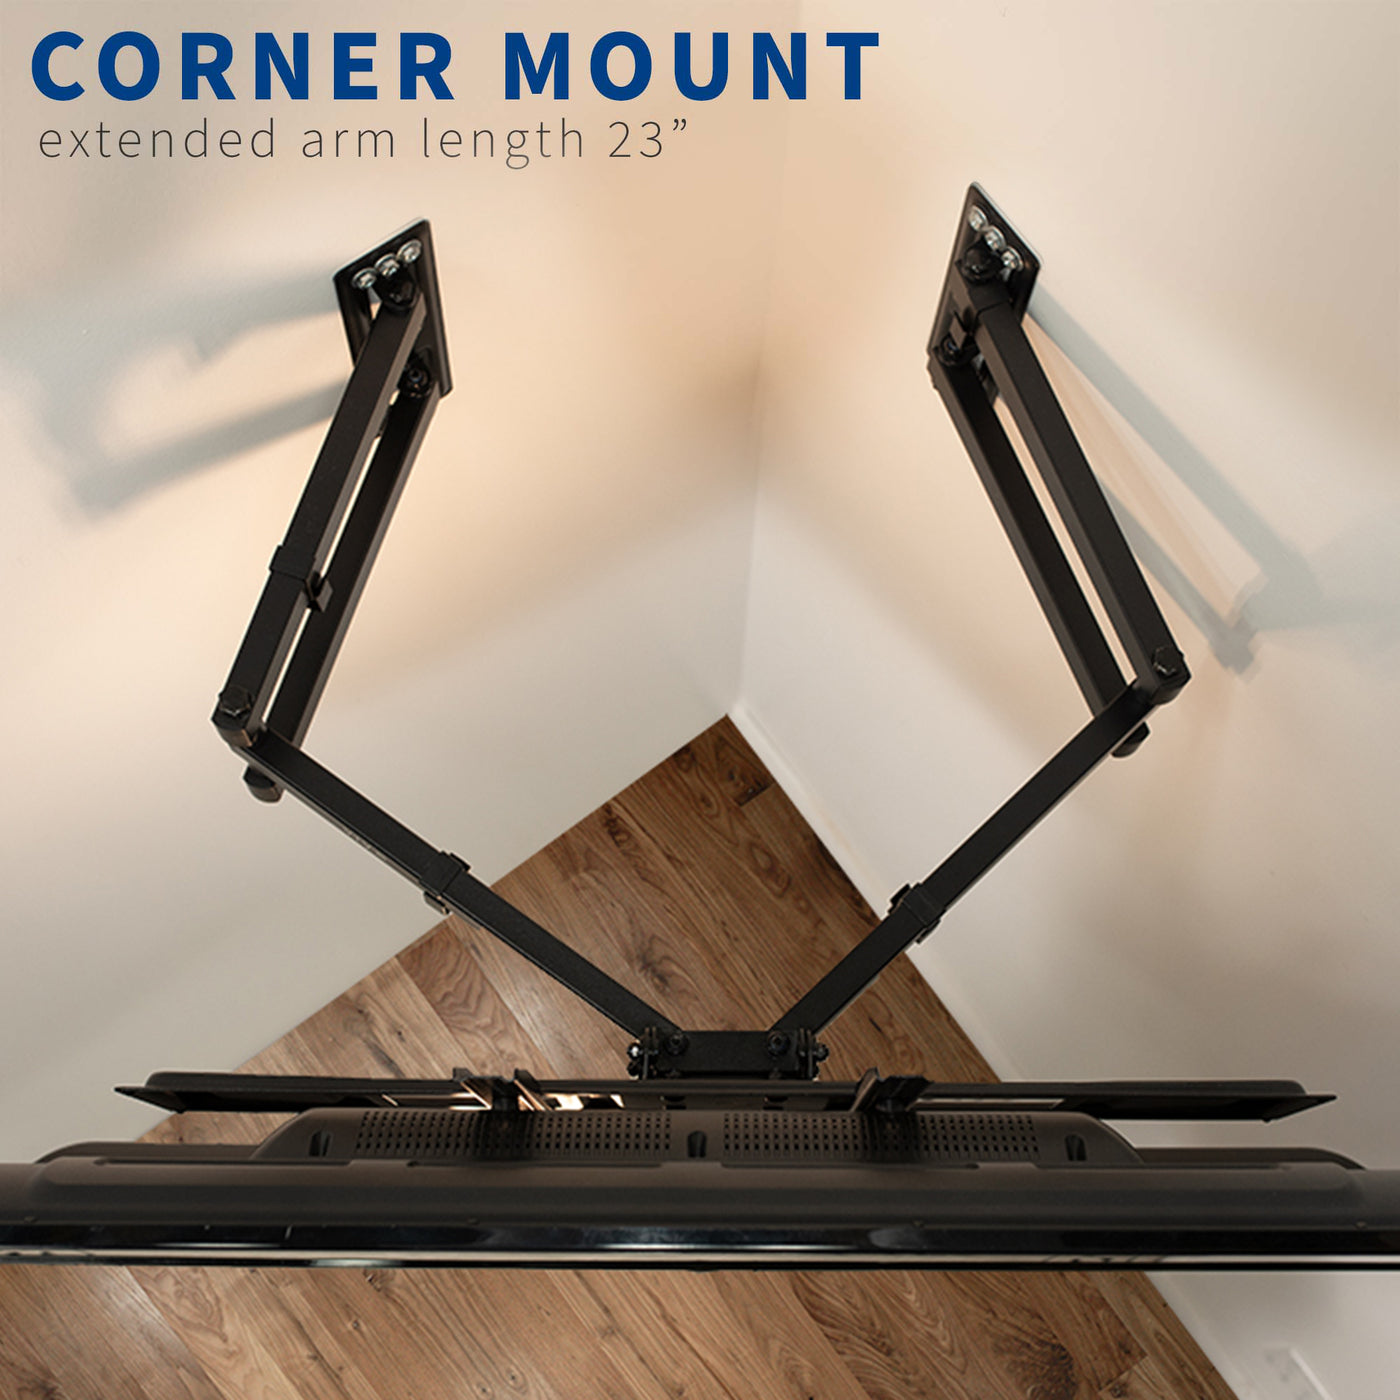 Corner TV wall mount secured to both walls for maximum security of the TV screen.